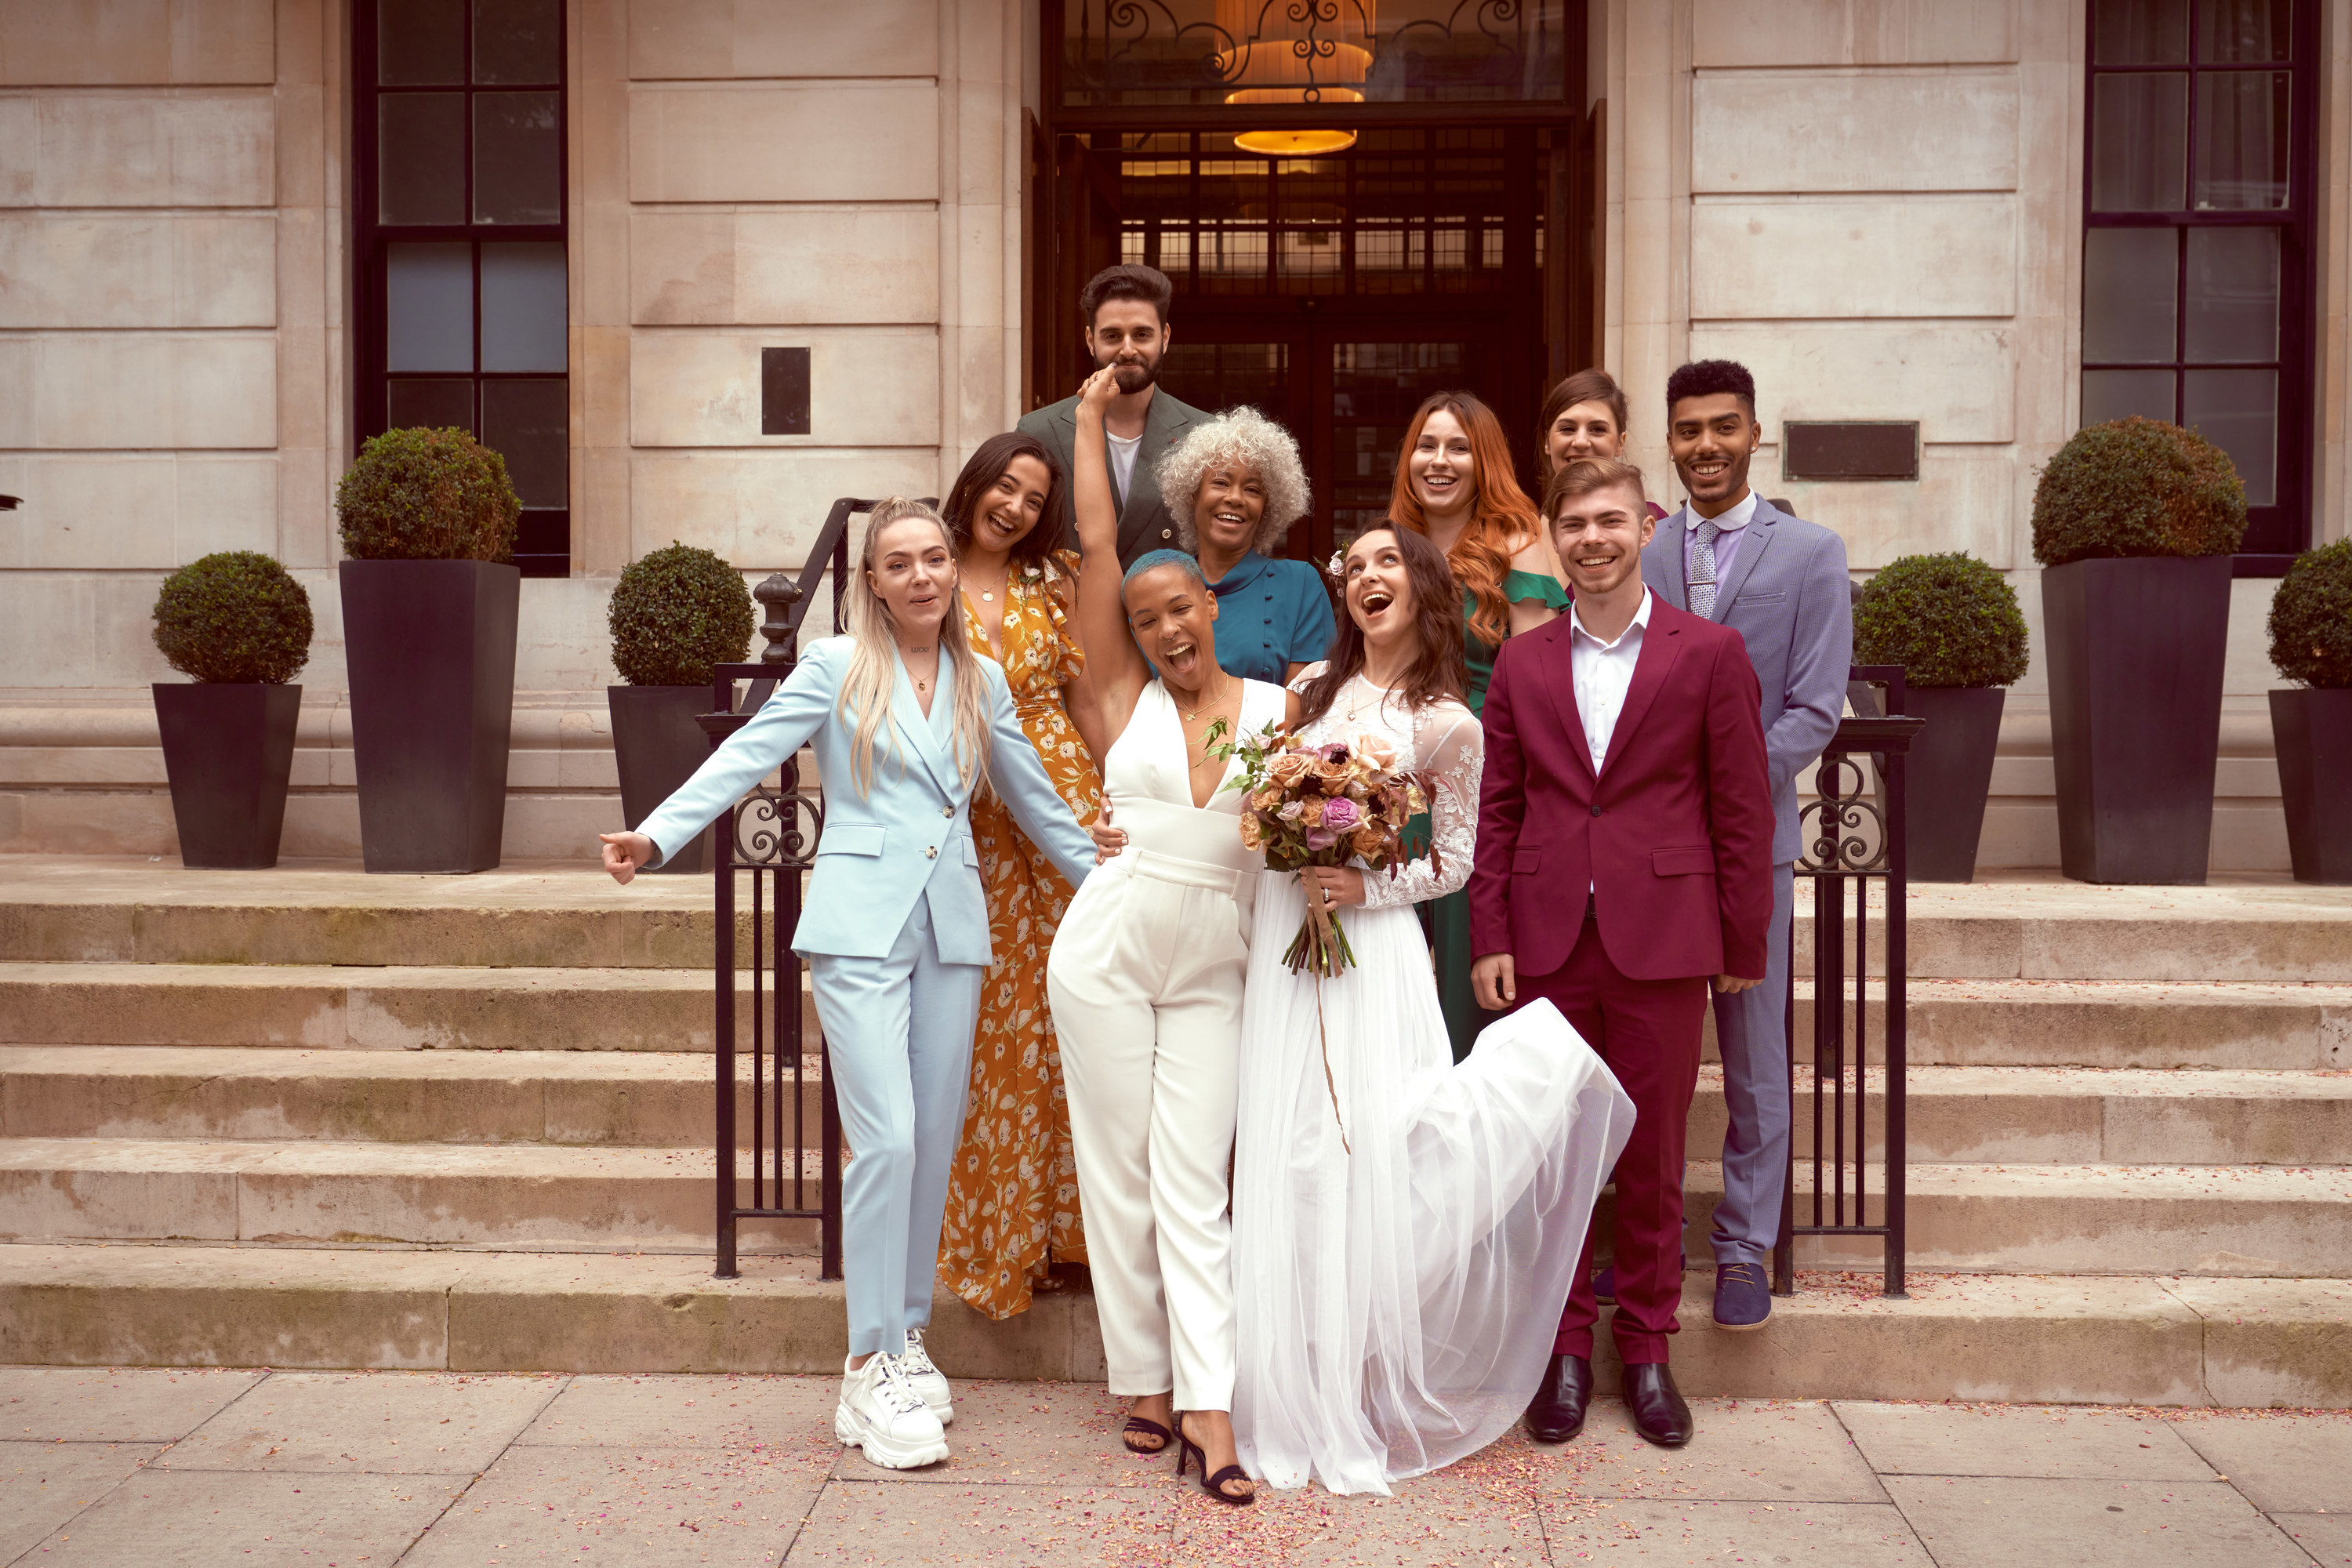 A wedding party of adults posing for a photo outside on steps